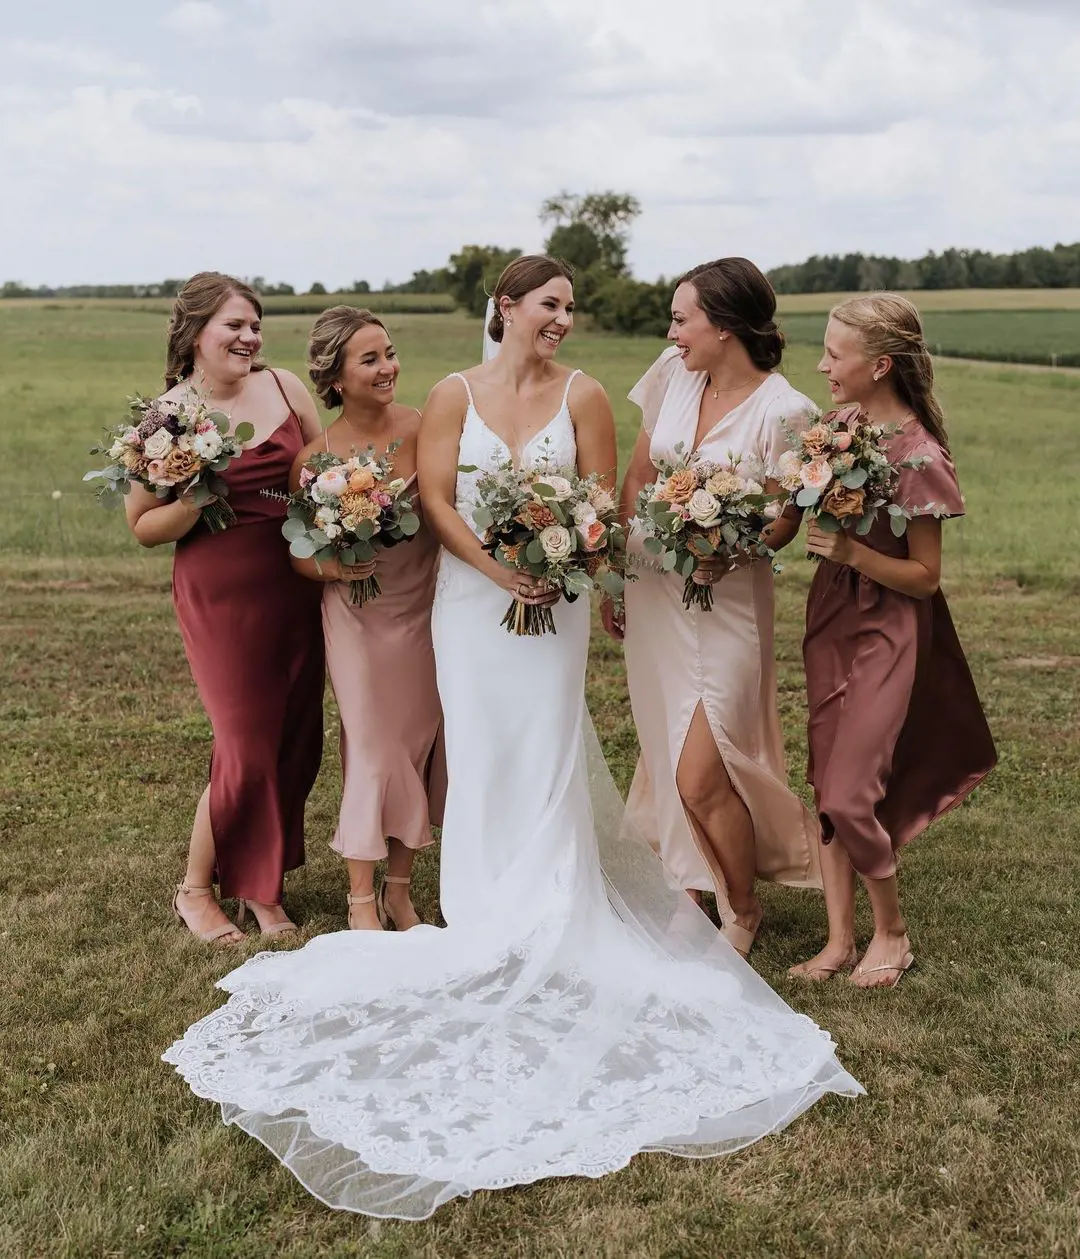 A bride with her maids holding flower bouquets and having some fun time